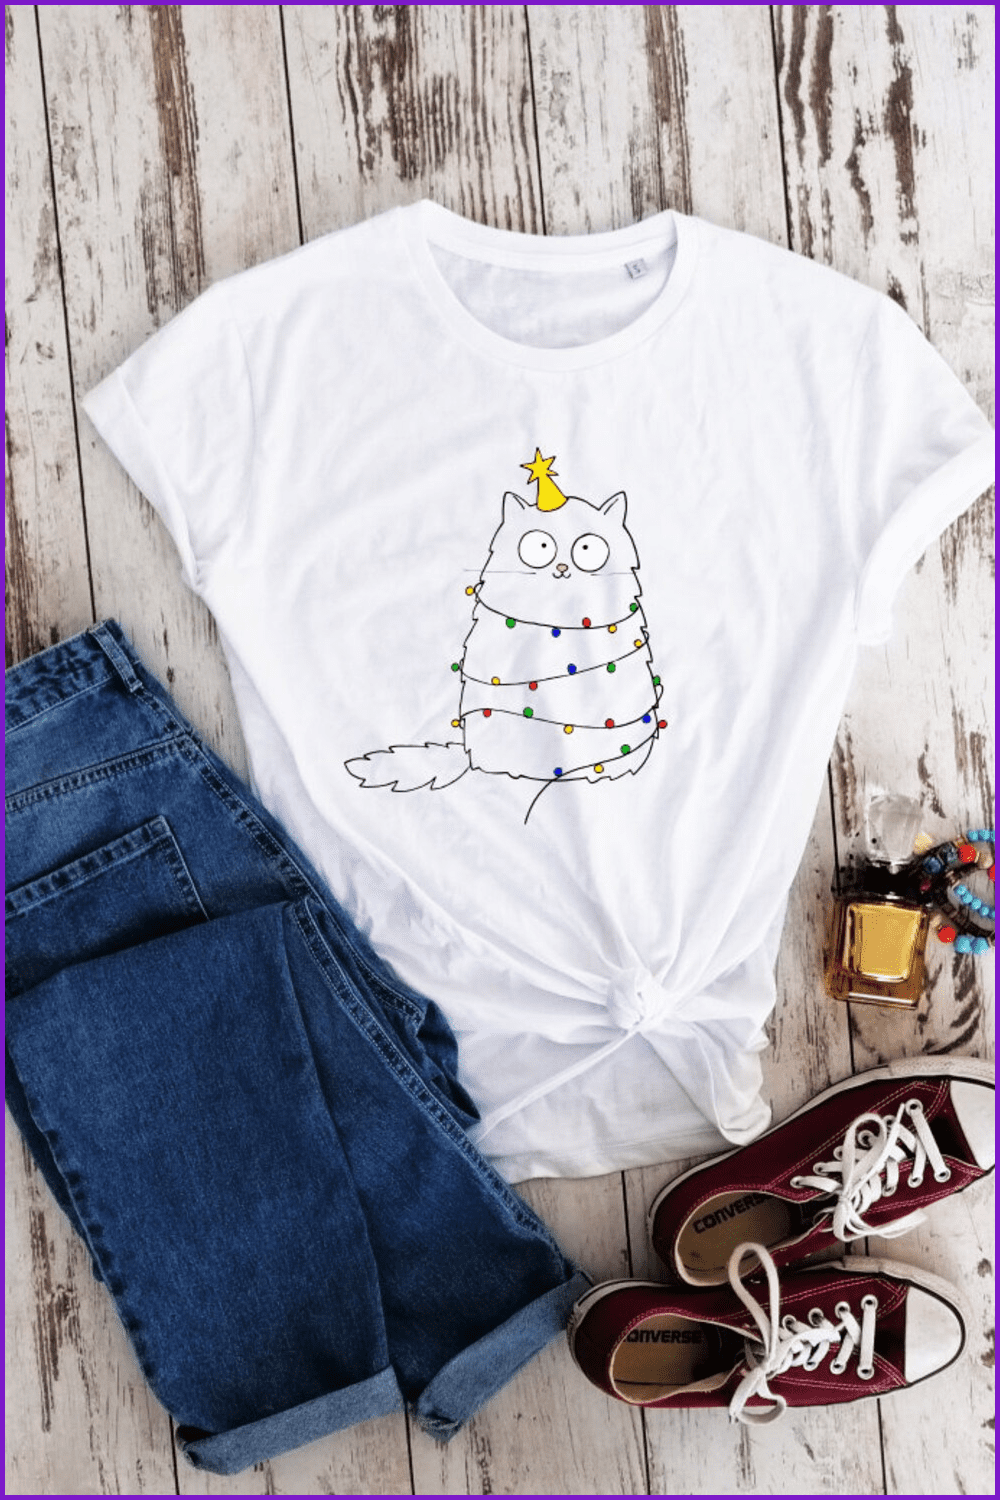 White t-shirt with a white cat with a Christmas tree star on its head and lights hanging over its body.